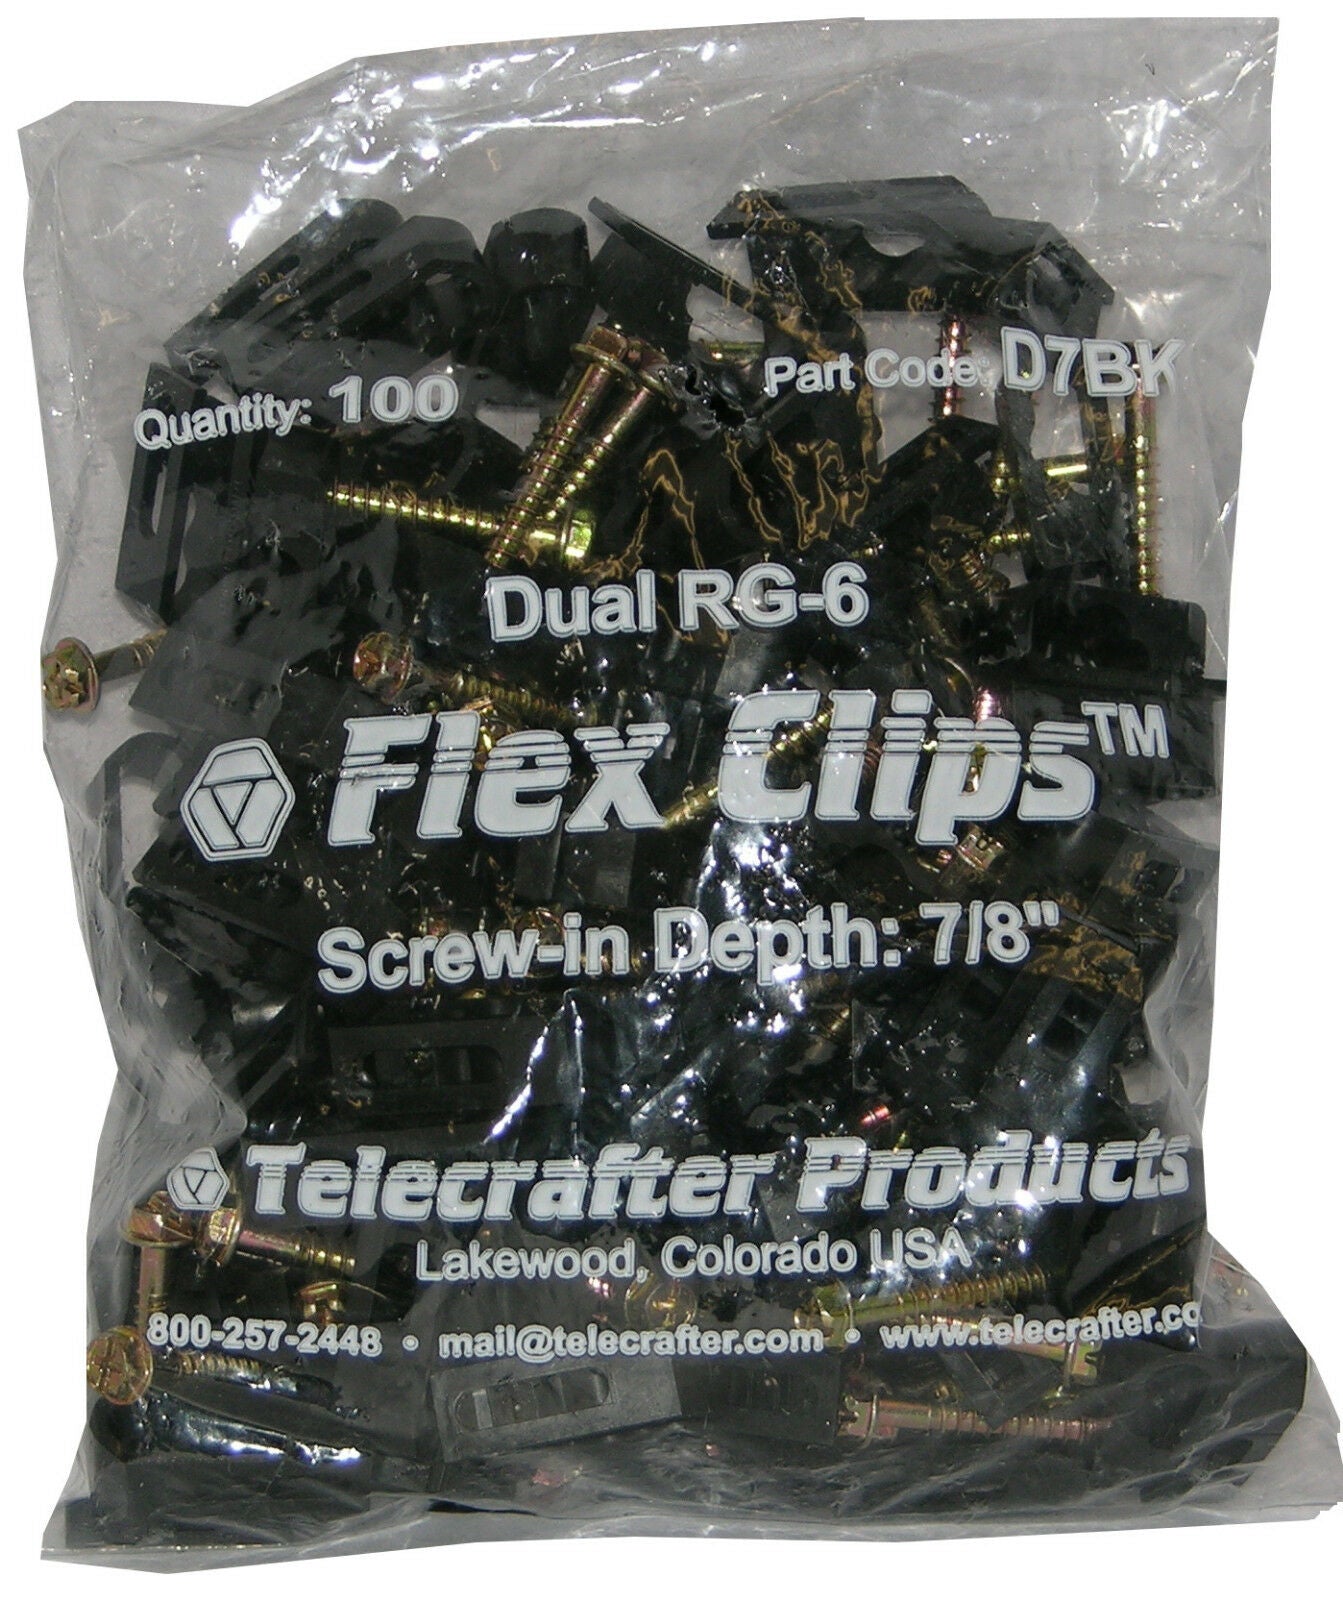 Telecrafter D7BK, Flex Clips for dual RG-6 or RG-59 Coax cable, 7/8" screw, 100/pack